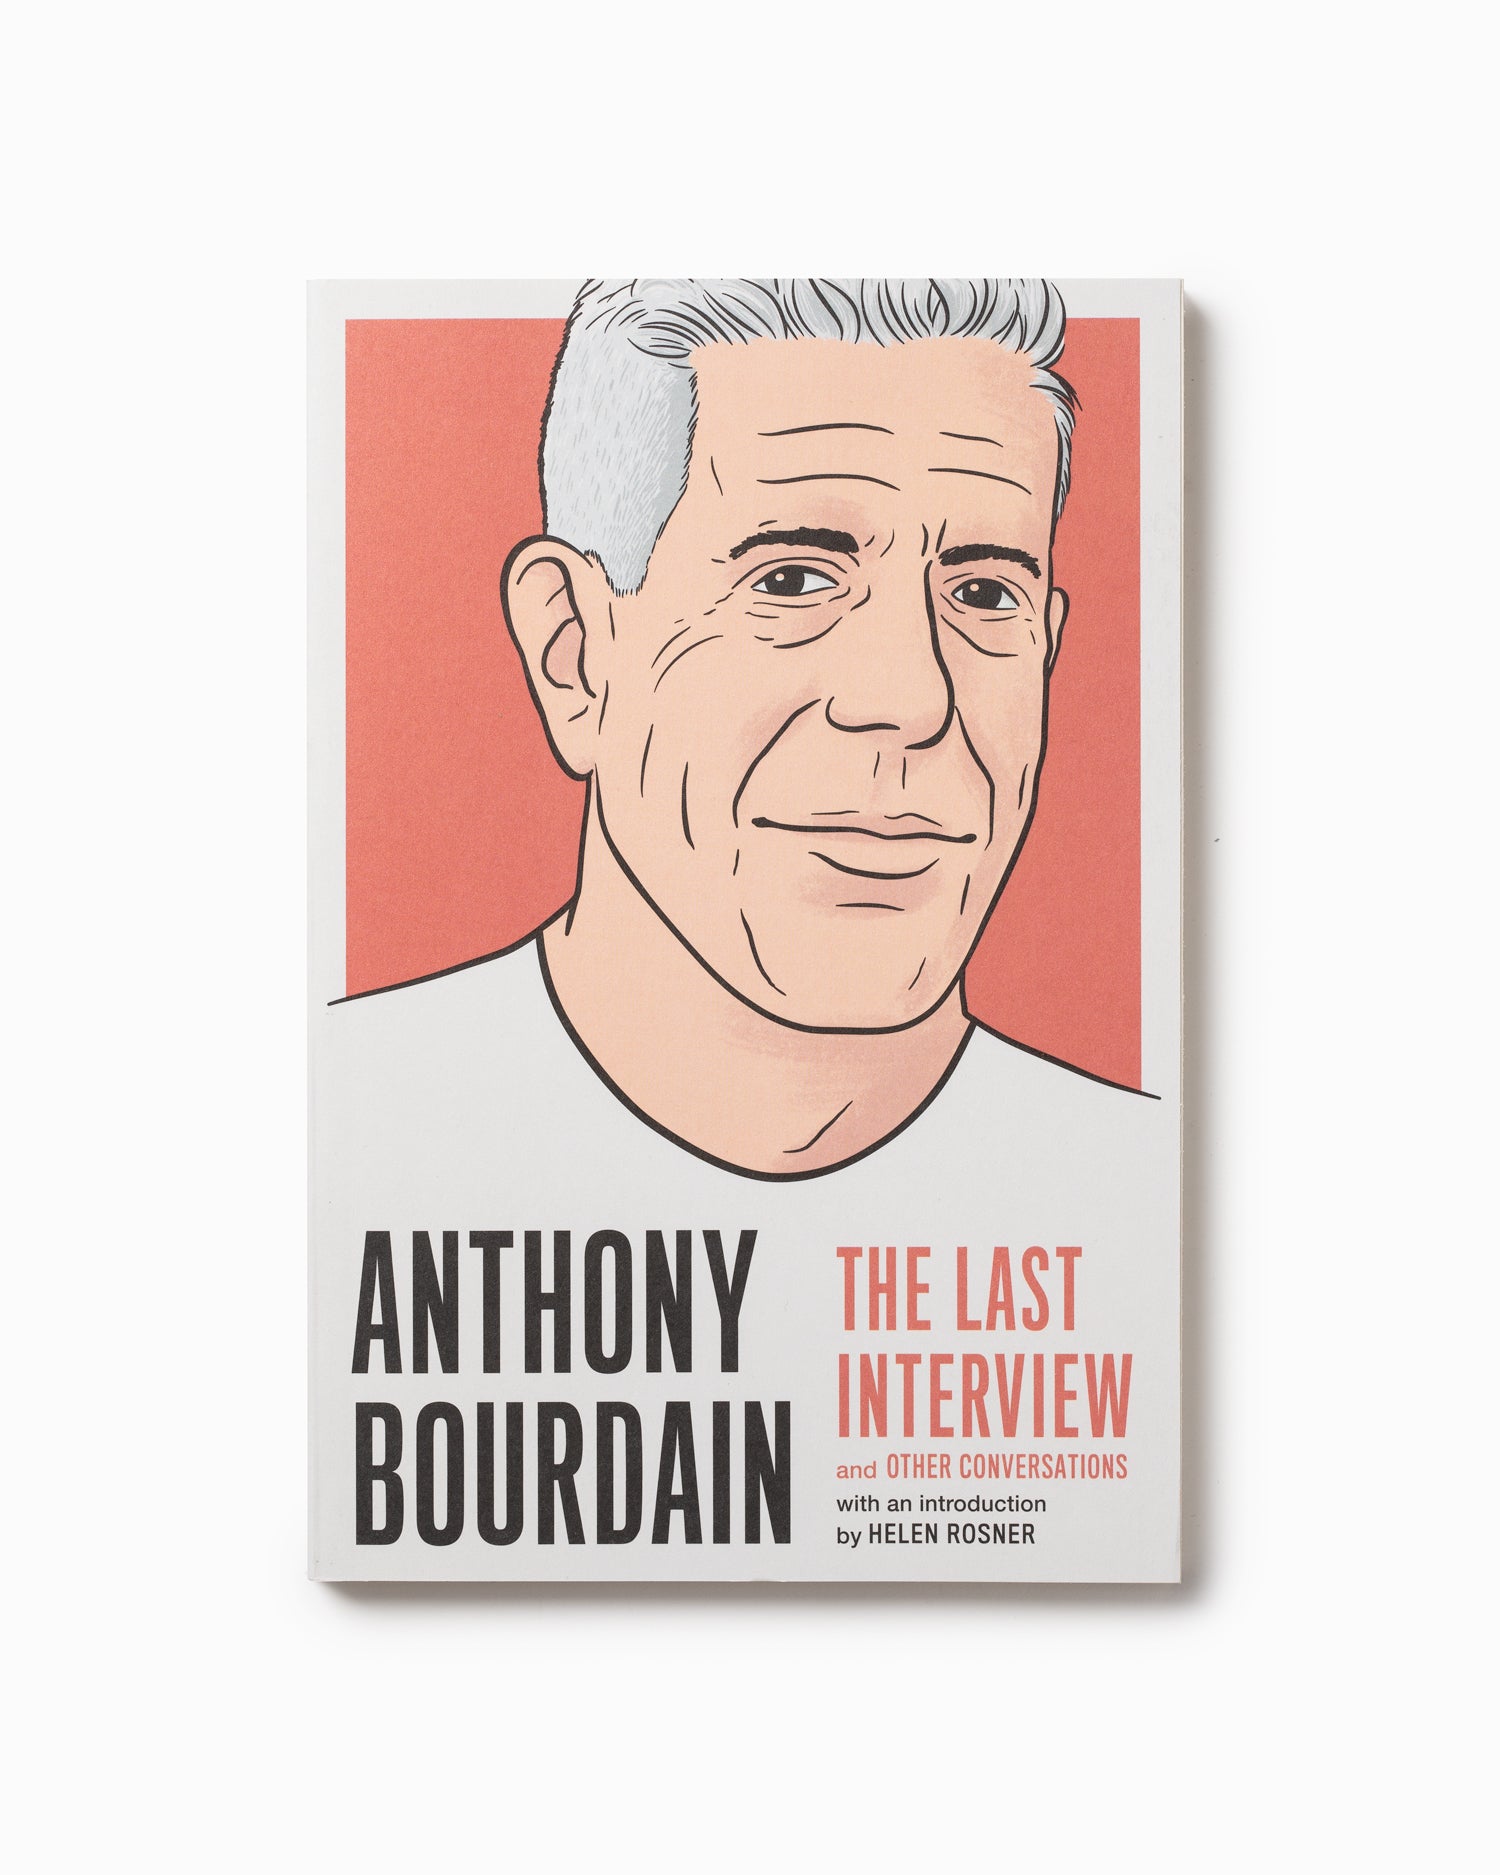 Anthony Bourdain - The Last Interview and Other Conversations